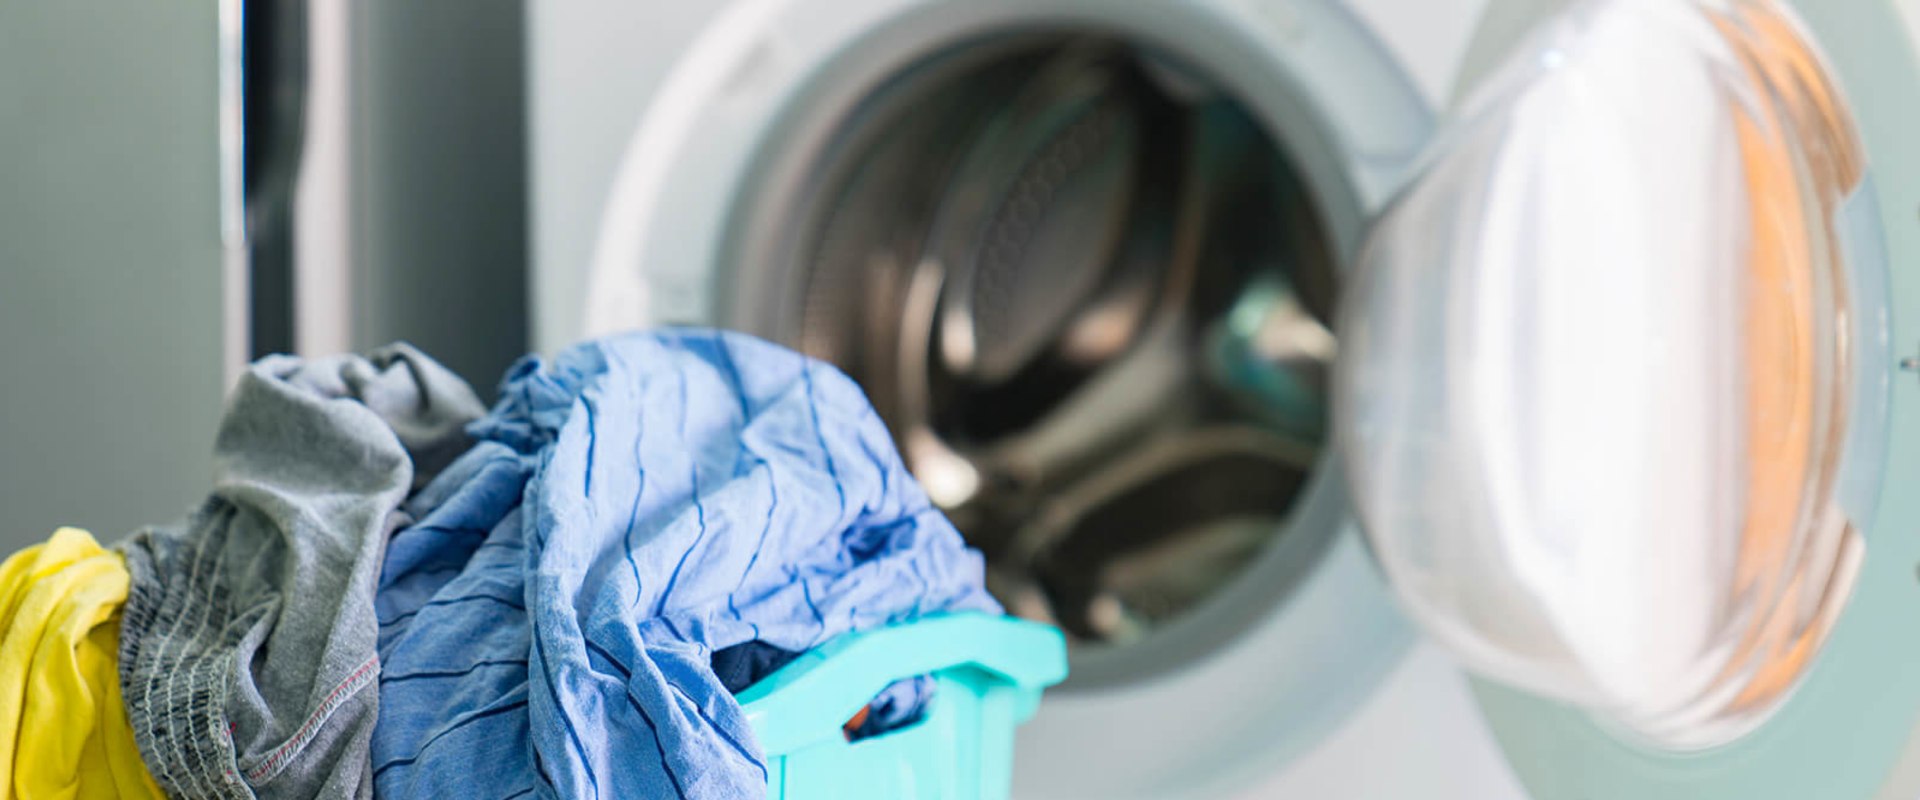 Housekeeping and Laundry Services: What You Need to Know